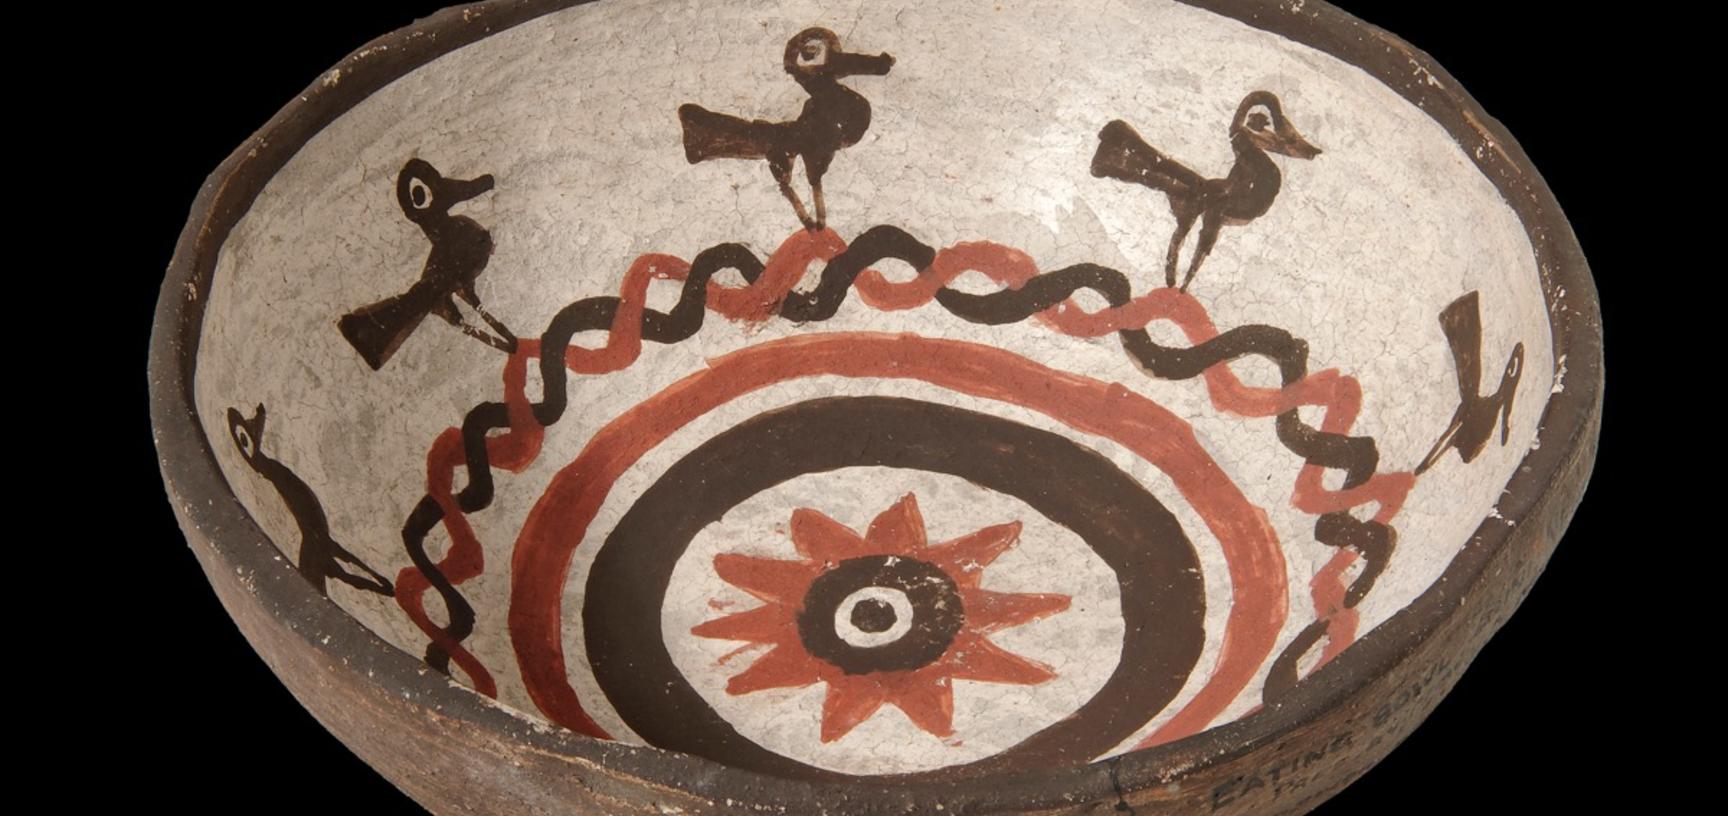 Small eating bowl made in Zuni Pueblo with painted decoration of birds and a sunflower in the centre, collected by James Stevenson for the United States Geological Survey.